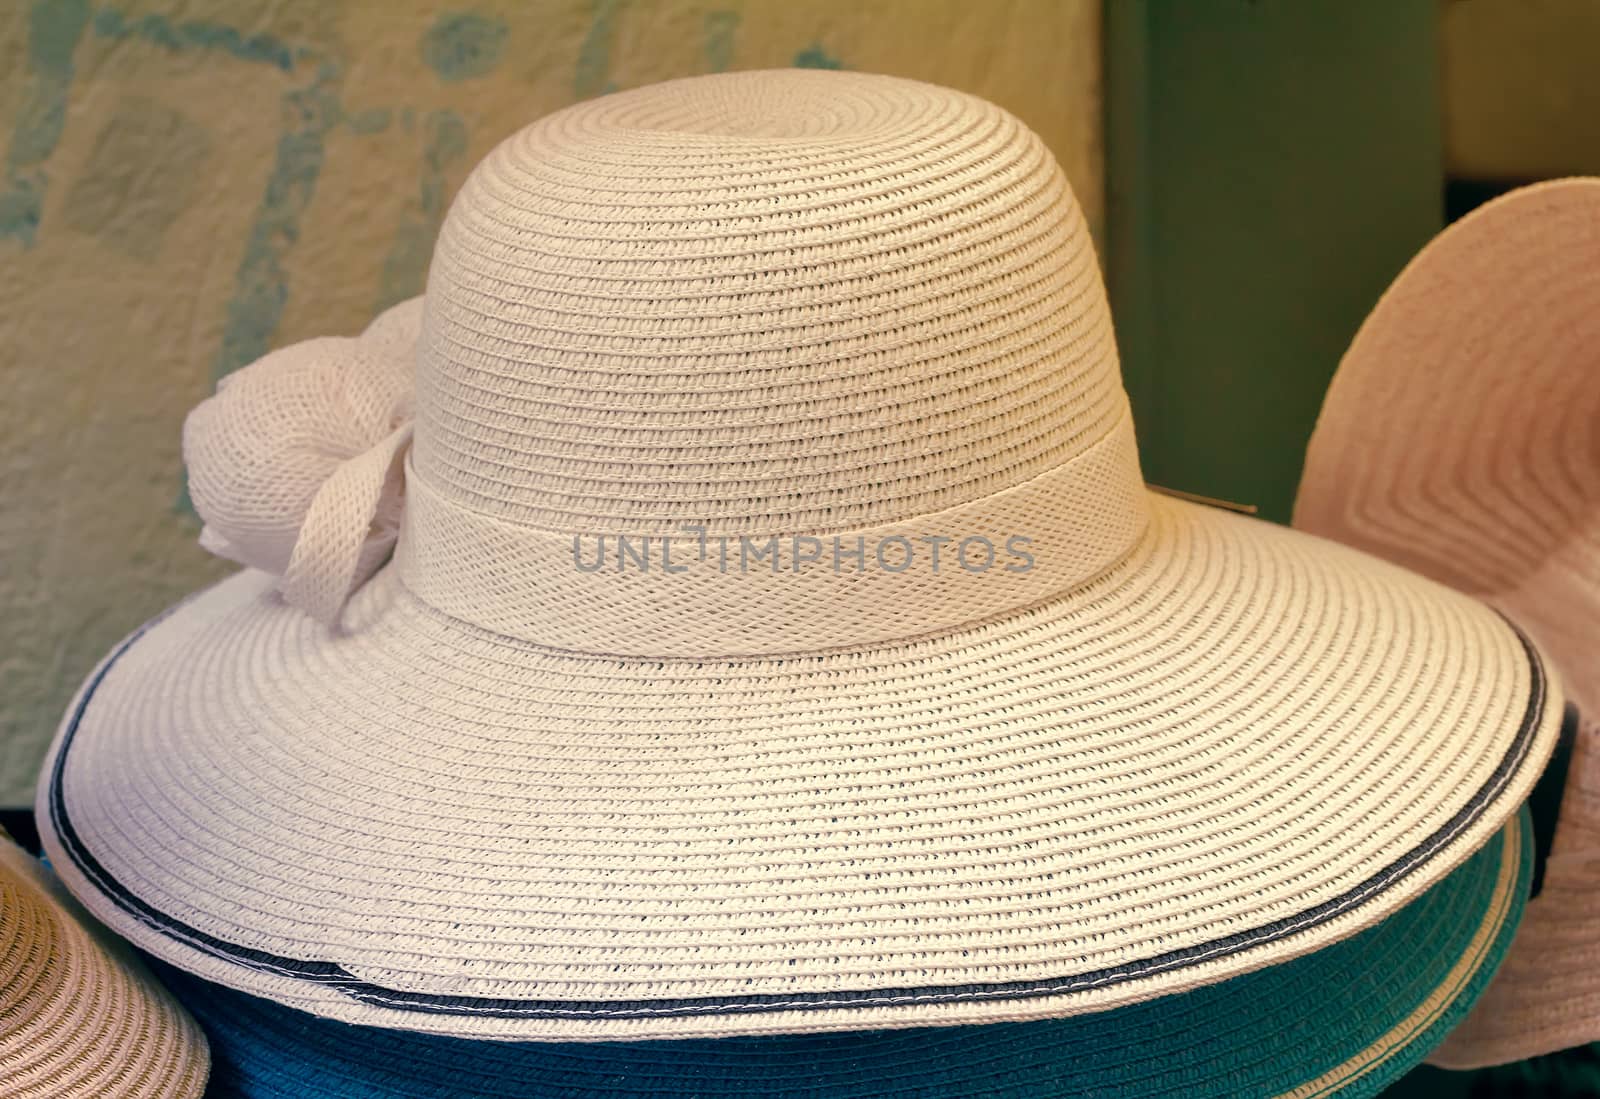 Women's summer hat with large brim, decorated with black ribbon, for protection from the sun.